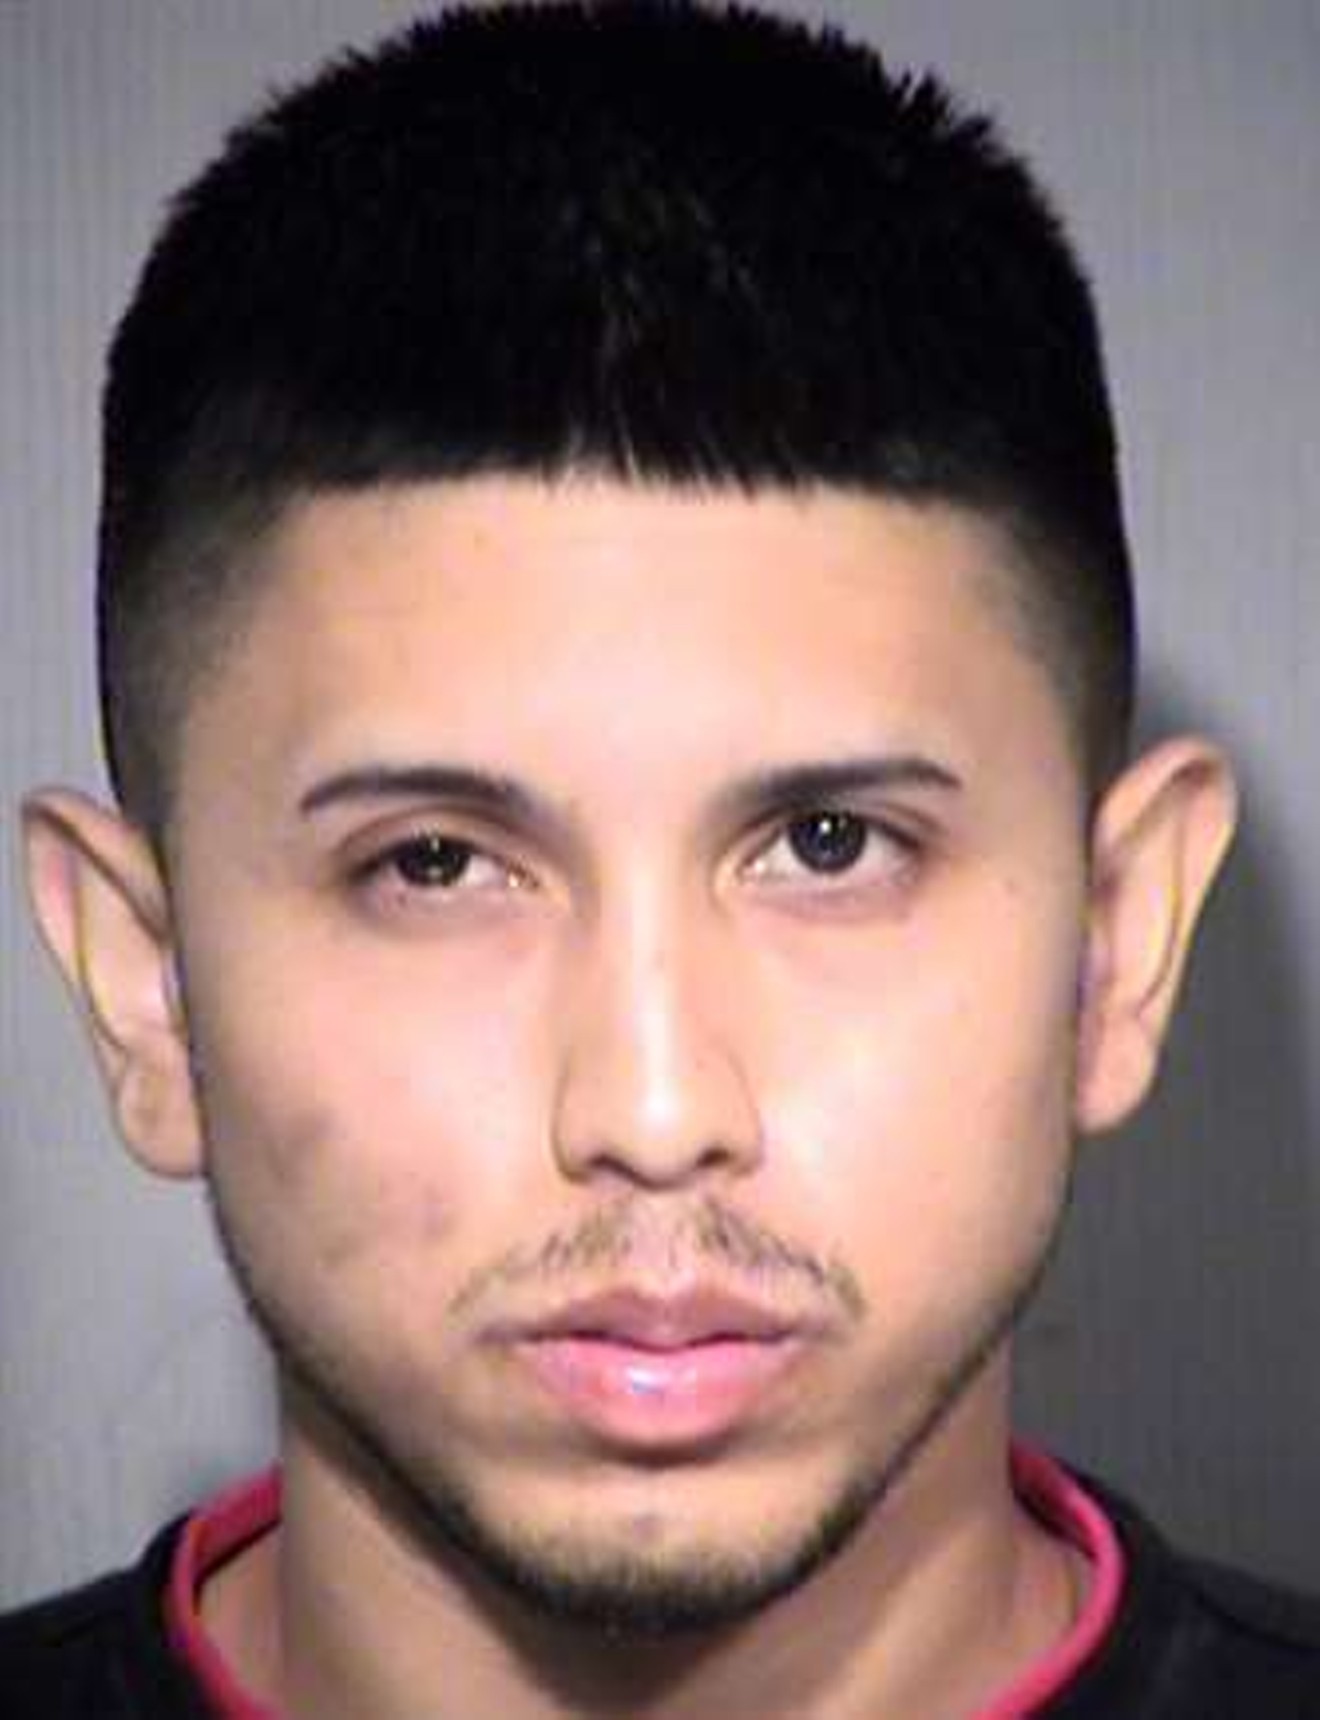 Aaron Saucedo faces 20 felony counts, including nine murder charges.